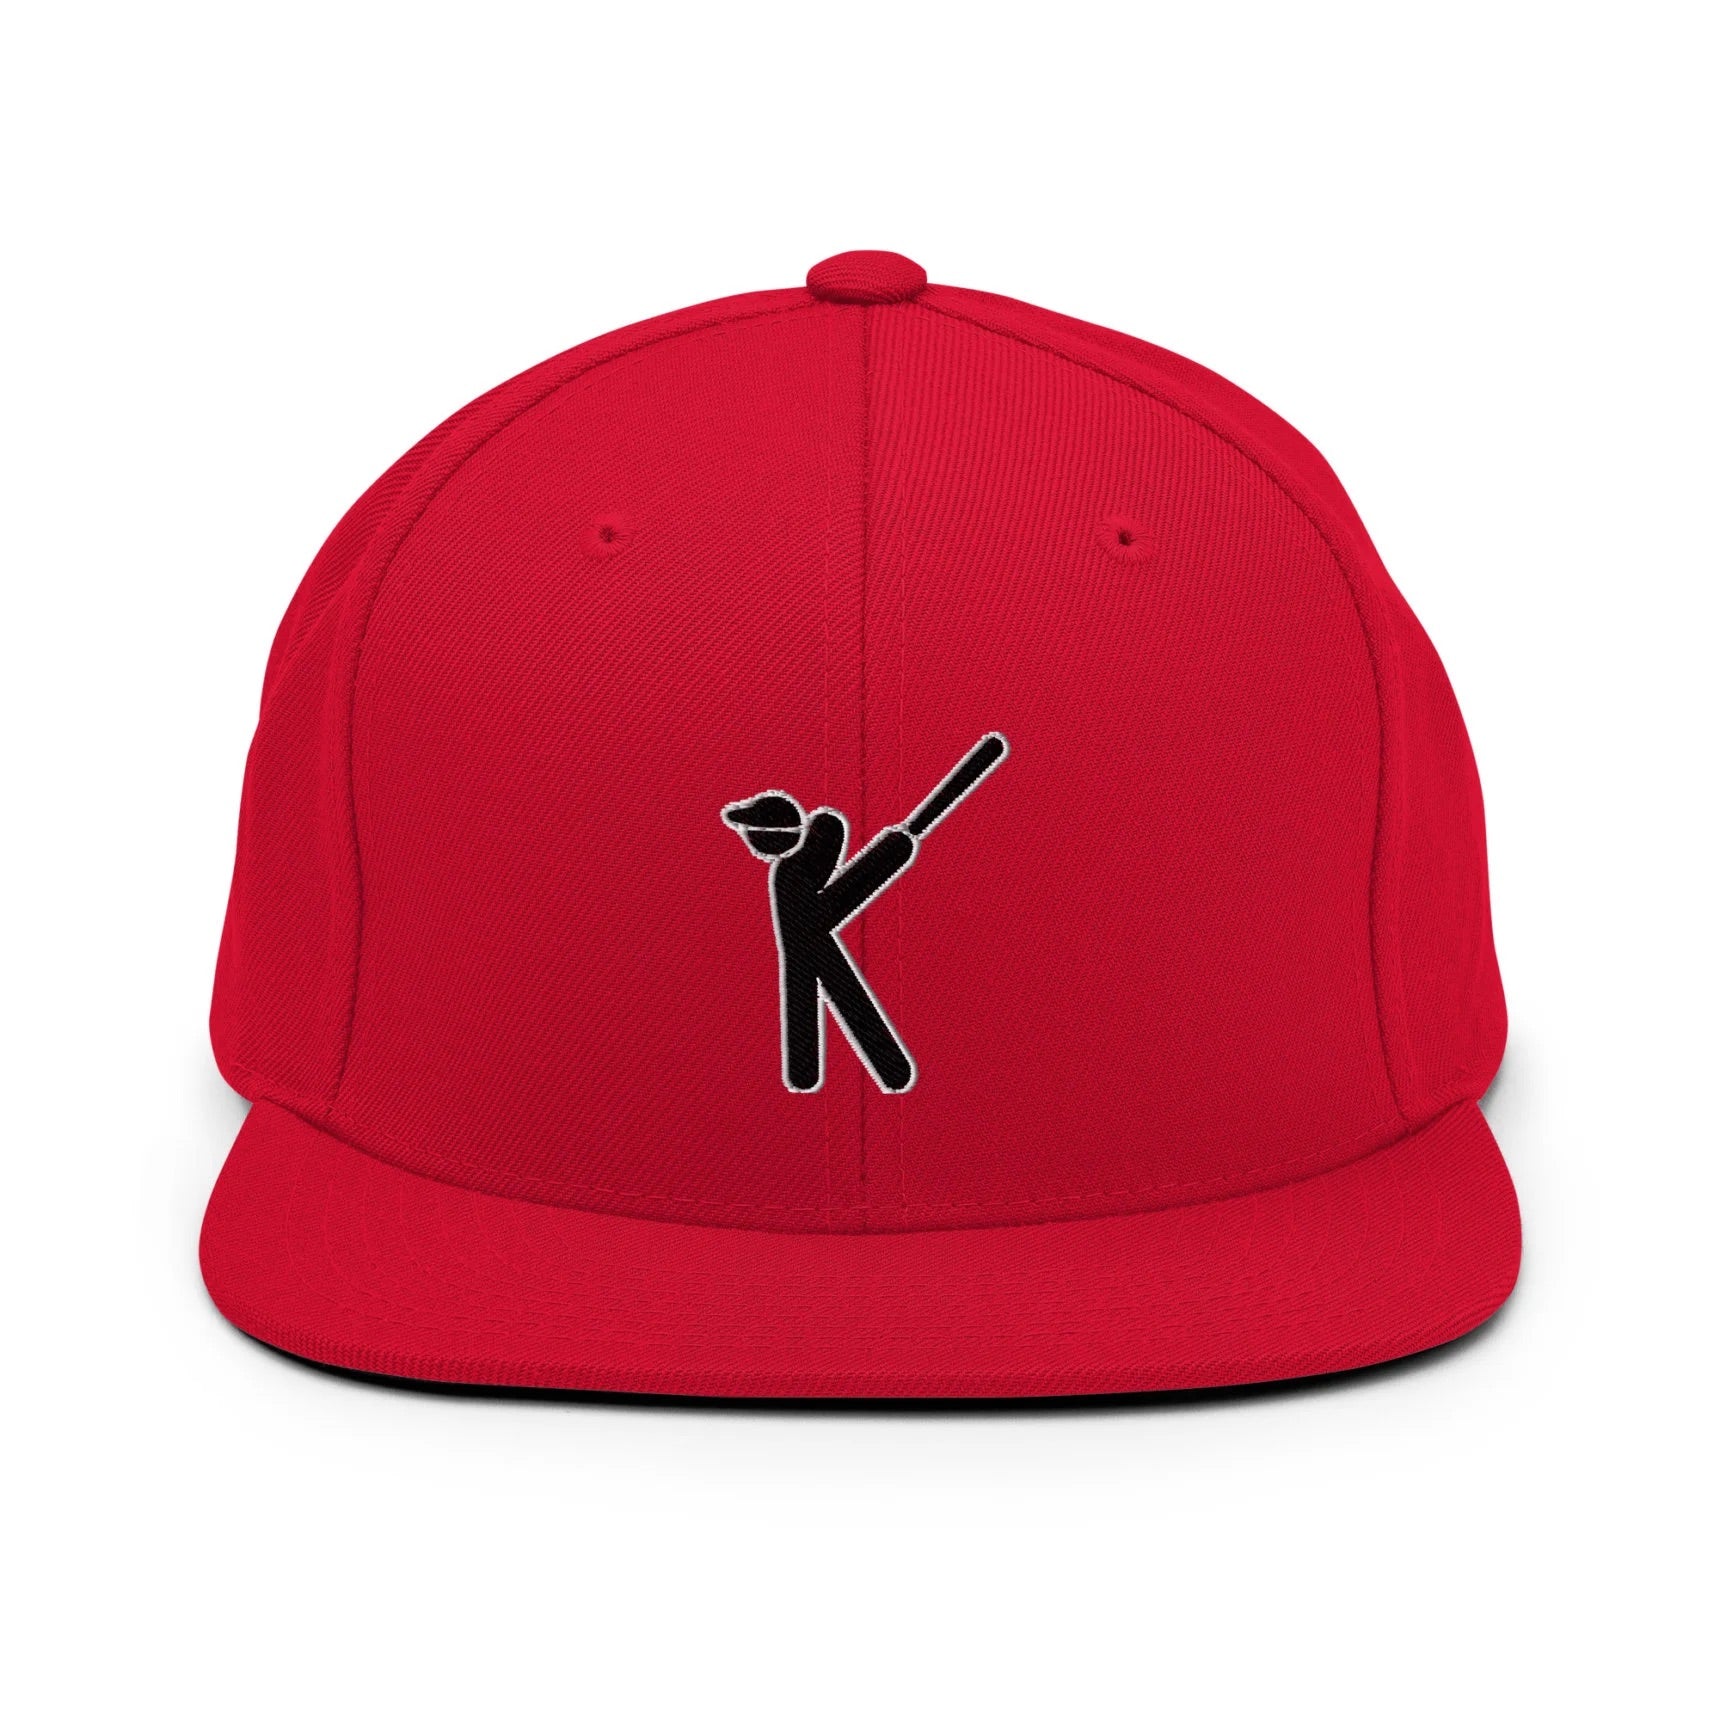 Kasabe ShowZone snapback hat in red